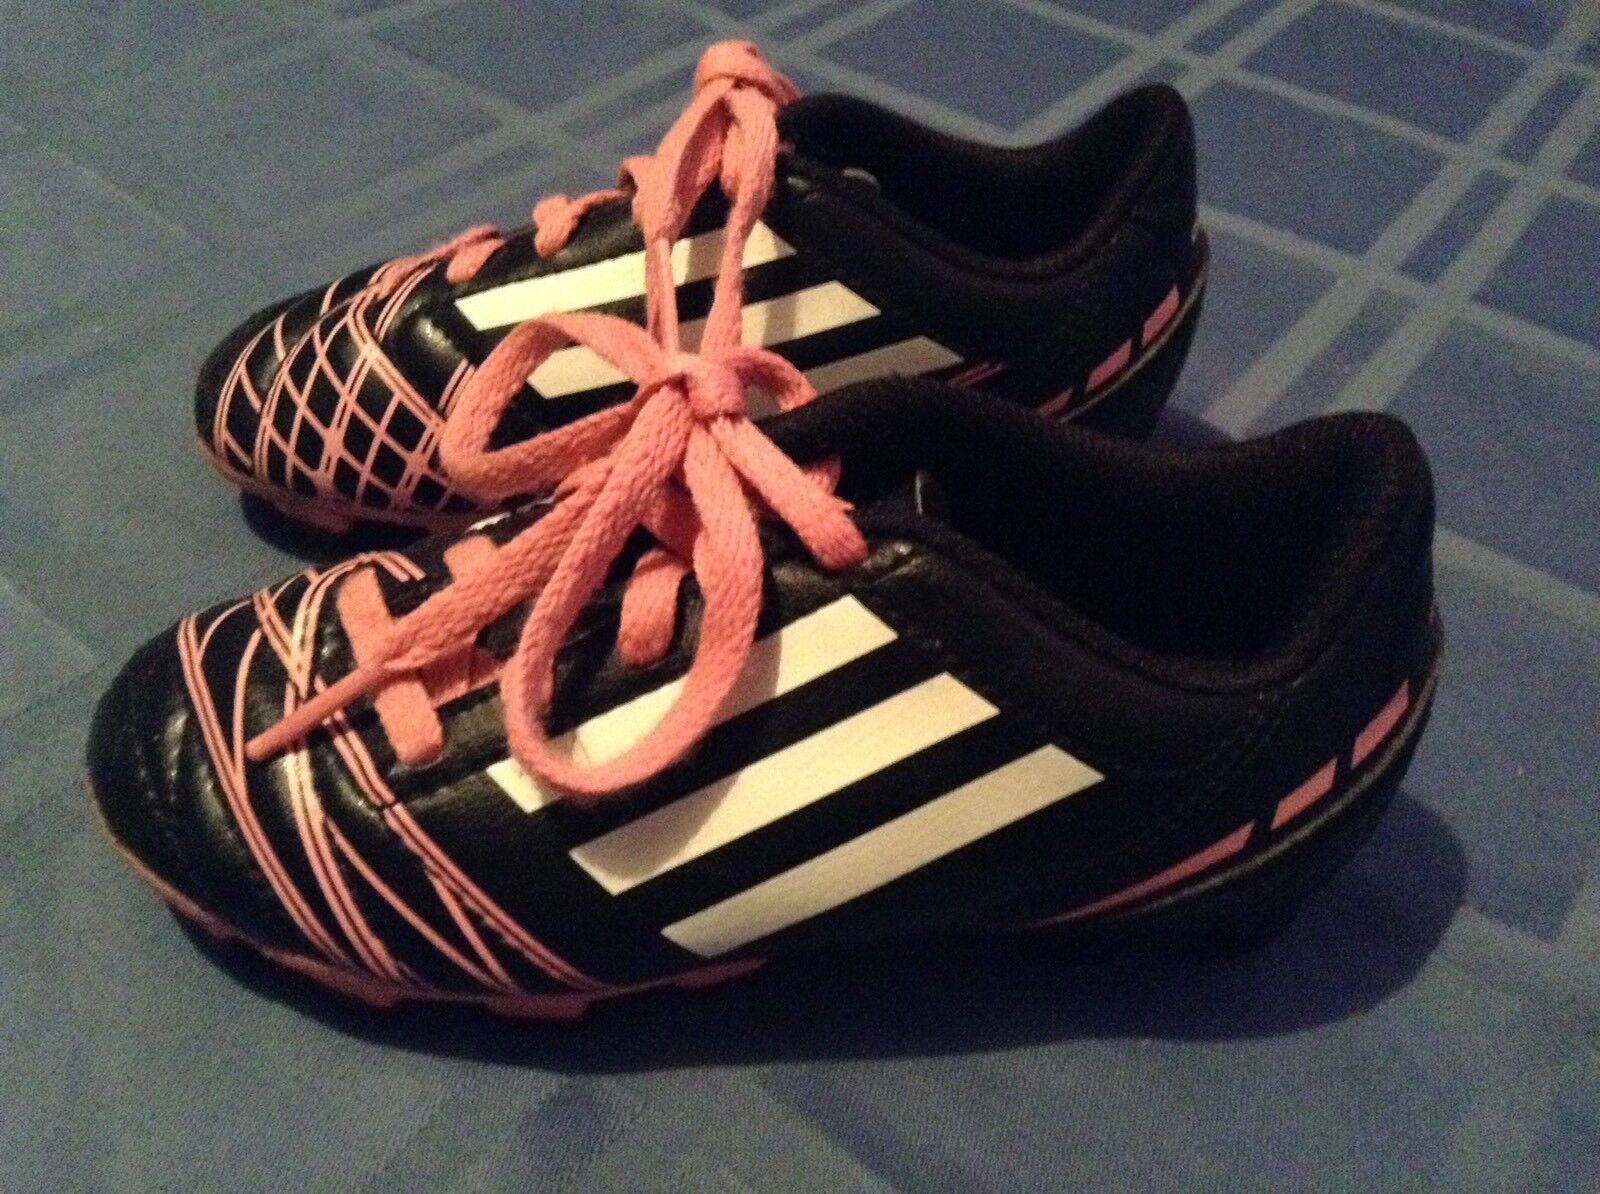 Primary image for Adidas cleats Girls Size 10.5 black pink soccer baseball softball  shoes striped